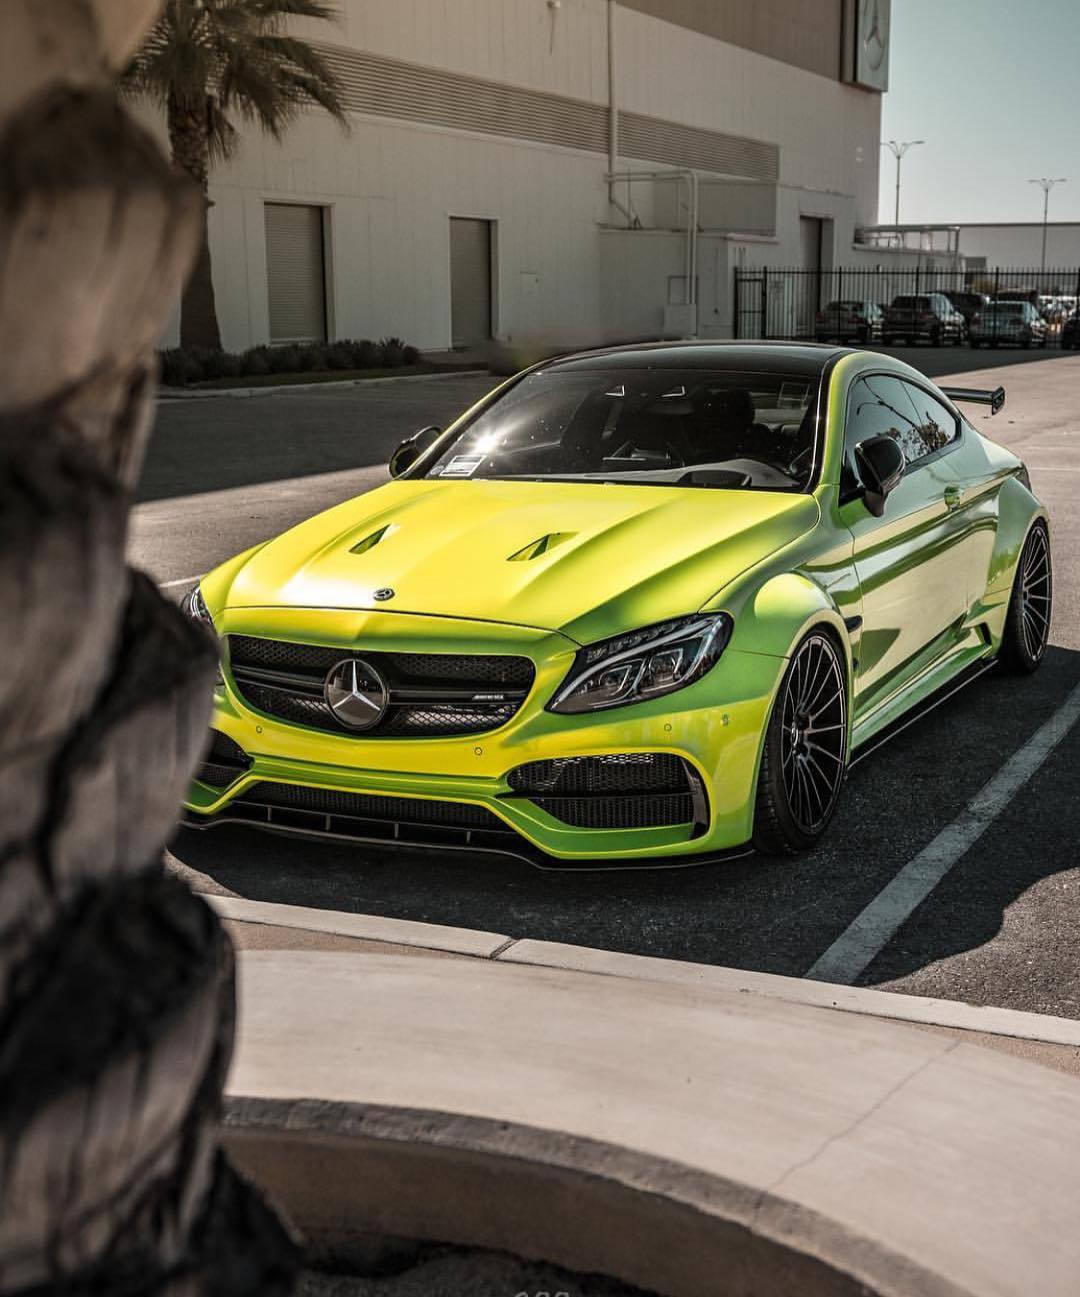 2018 Mercedes-Benz C63 AMG S - WIDEBODY C63S - 2K MILES - RDBLA WORK - Used - VIN 00000000000000000 - 2,000 Miles - 8 cyl - 2WD - Automatic - Coupe - Los Angeles, CA 90210, United States